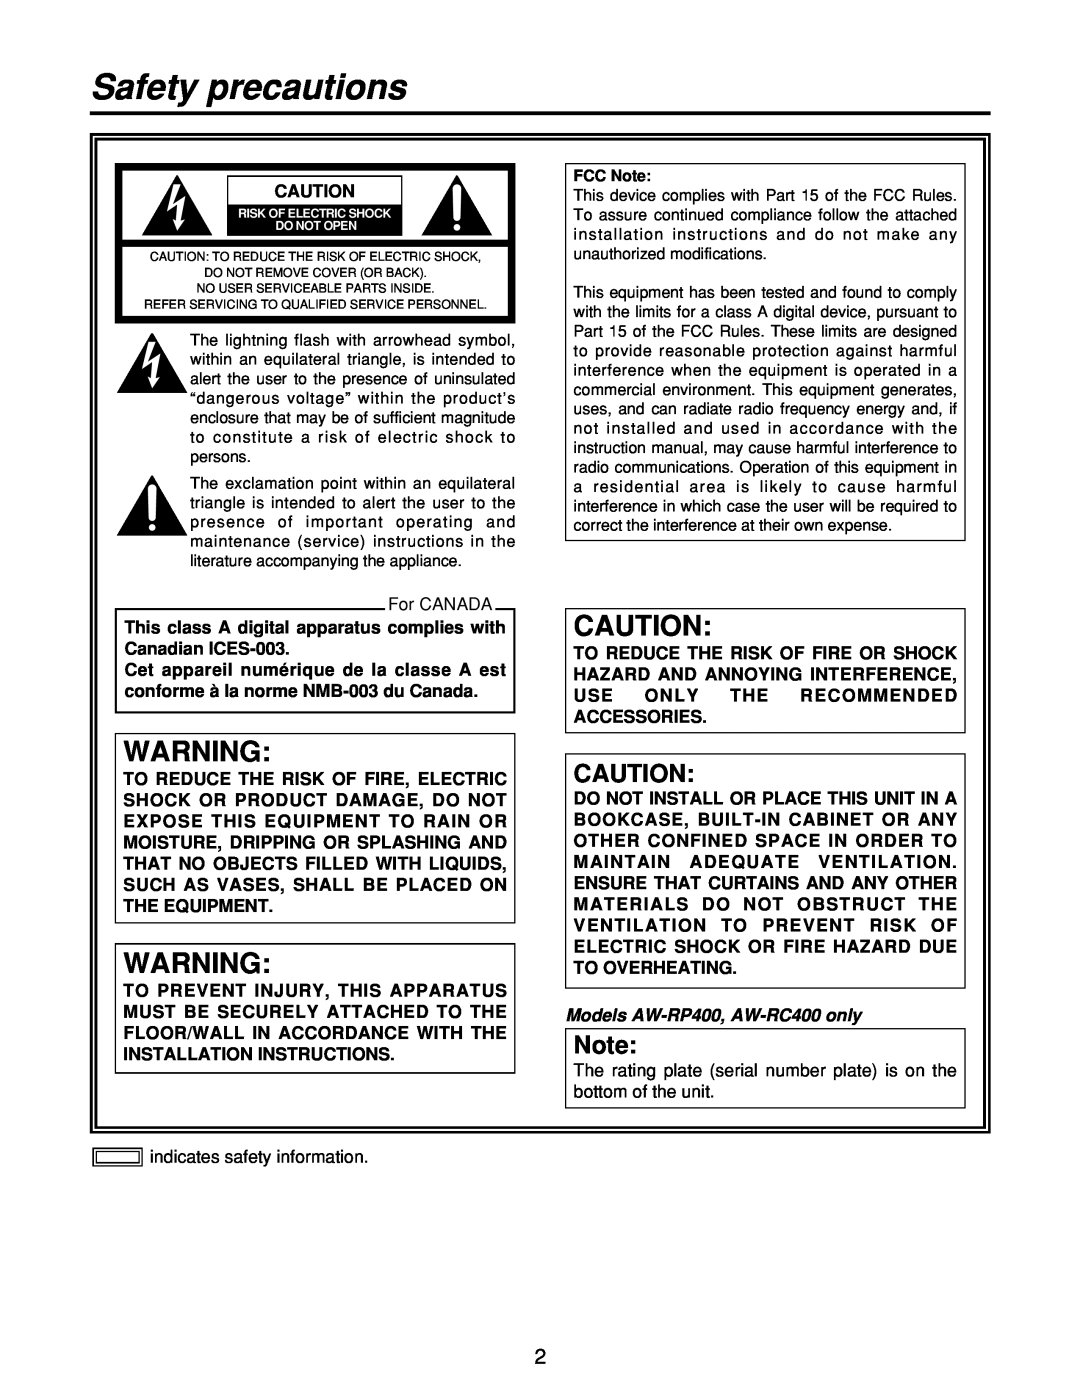 Panasonic AW-RC400, AW-PH400, AW-RL400 Safety precautions, This class A digital apparatus complies with Canadian ICES-003 